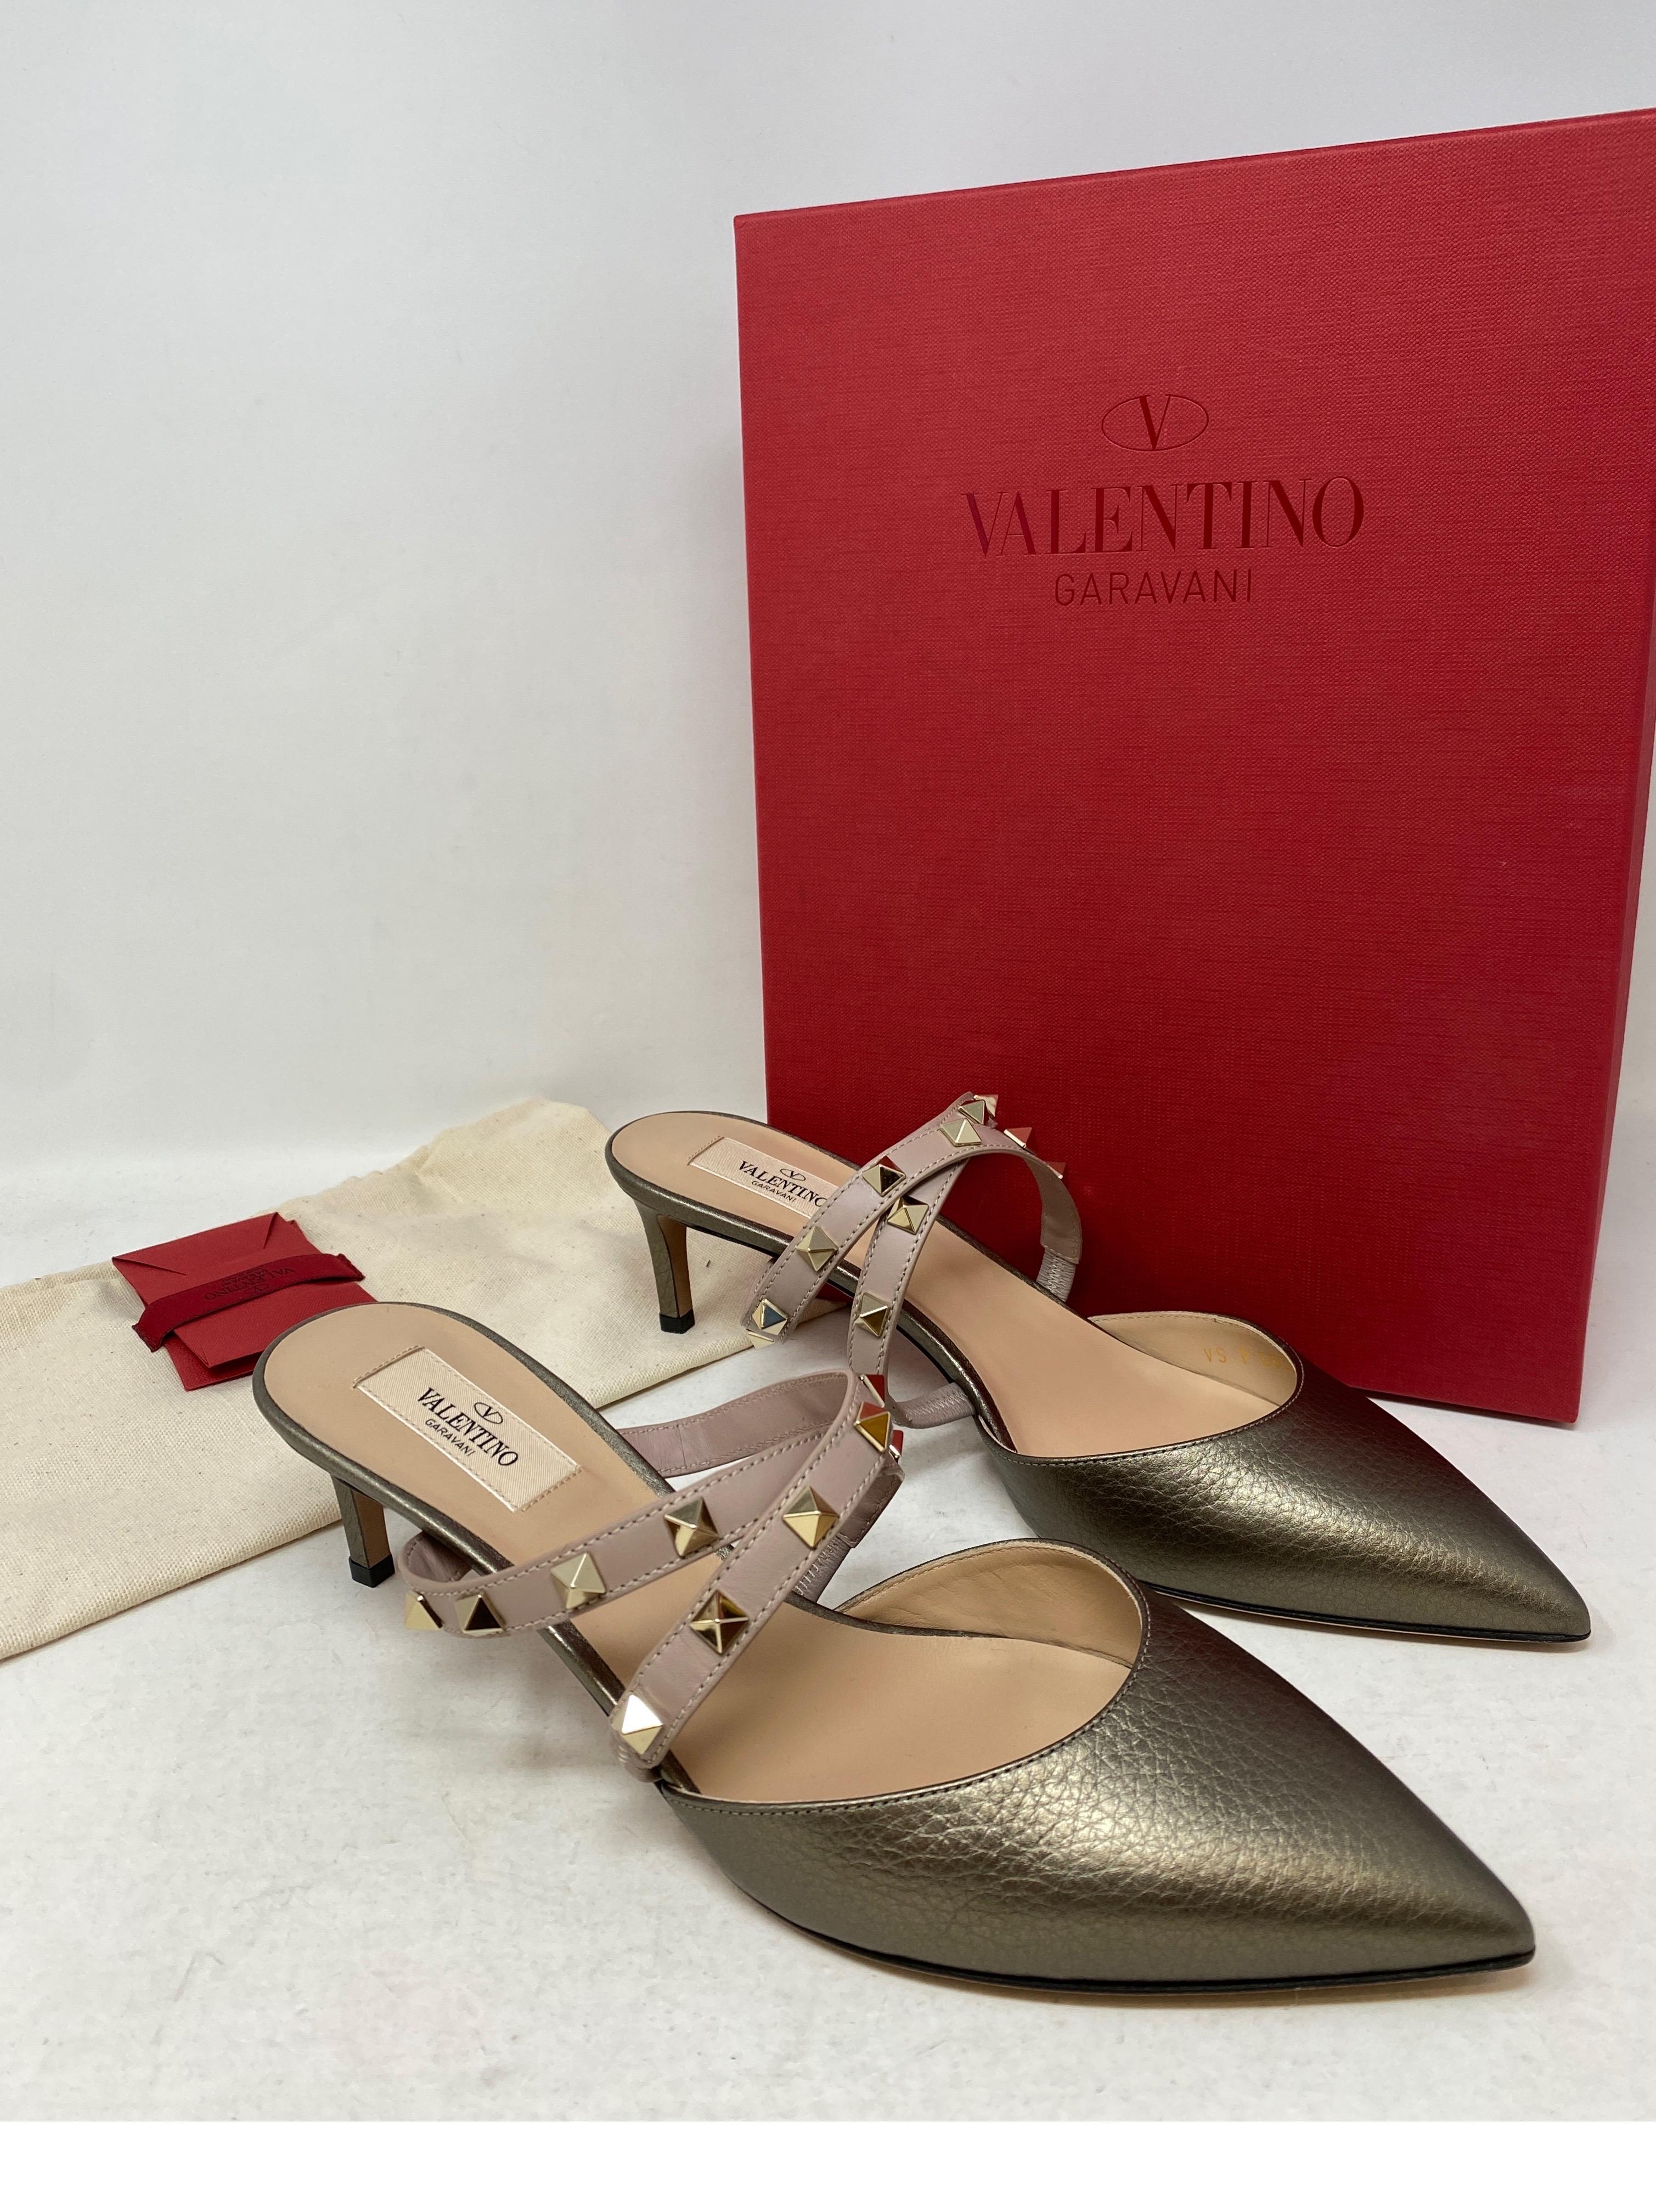 Valentino Rock Stud Heels. Brand new and never used heels. Size 39.5 European size. US size 9-9.5.  Includes original dust covers and box. All original packaging and tags included. Perfect height for heels. Guaranteed authentic. 